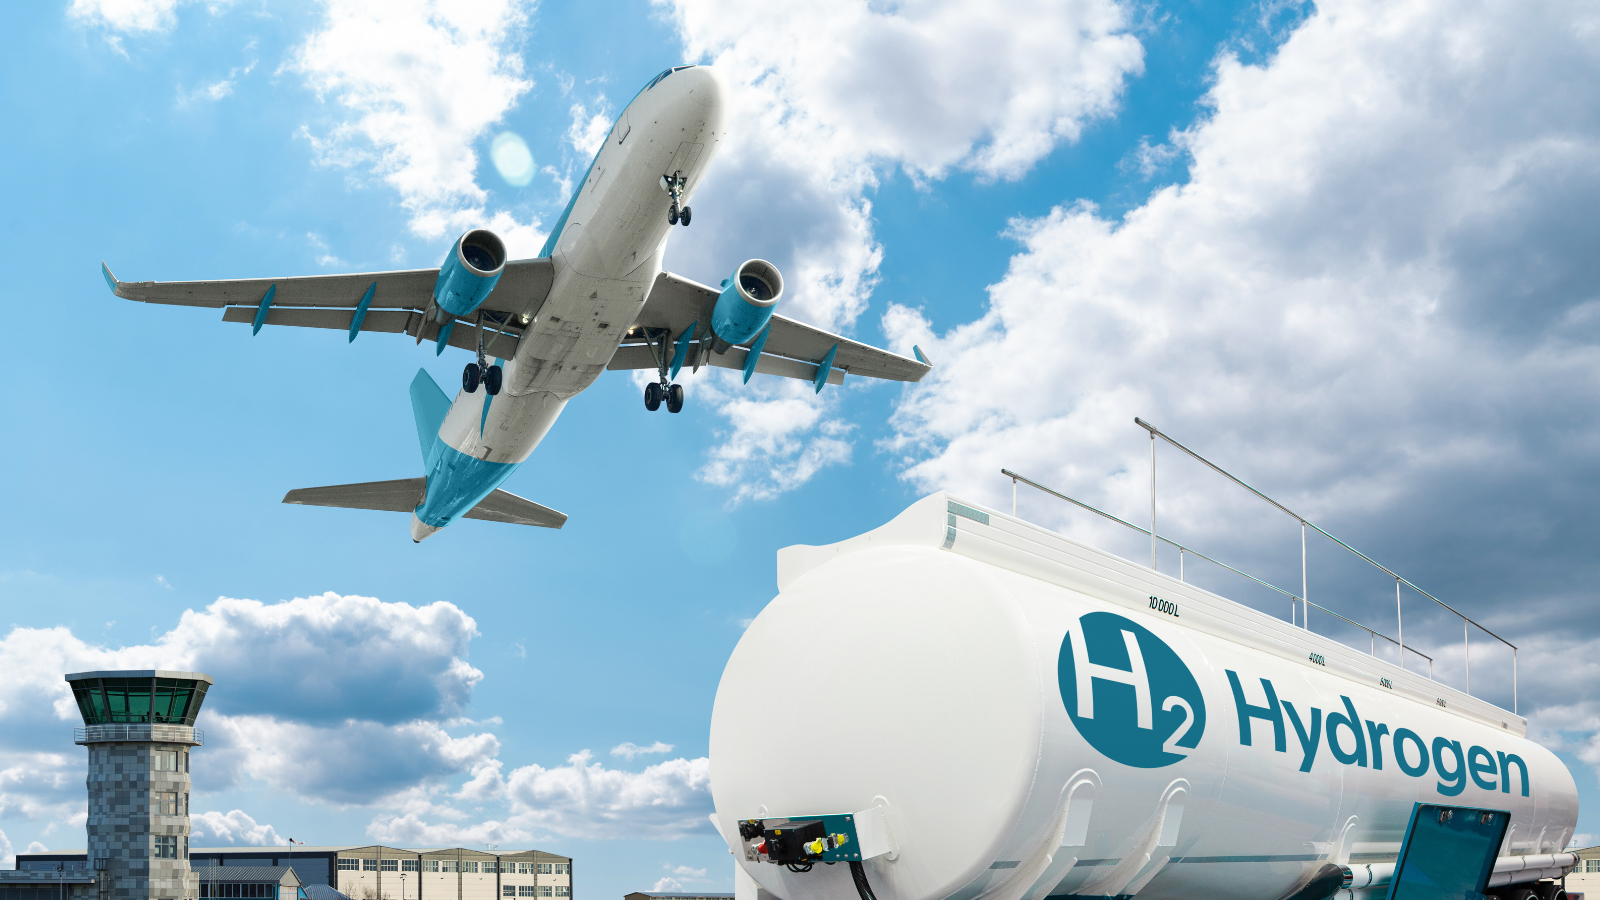 An image of an aeroplane taking off from an airport with a hydrogen fuel tank appearing in the photo to emphasise the story